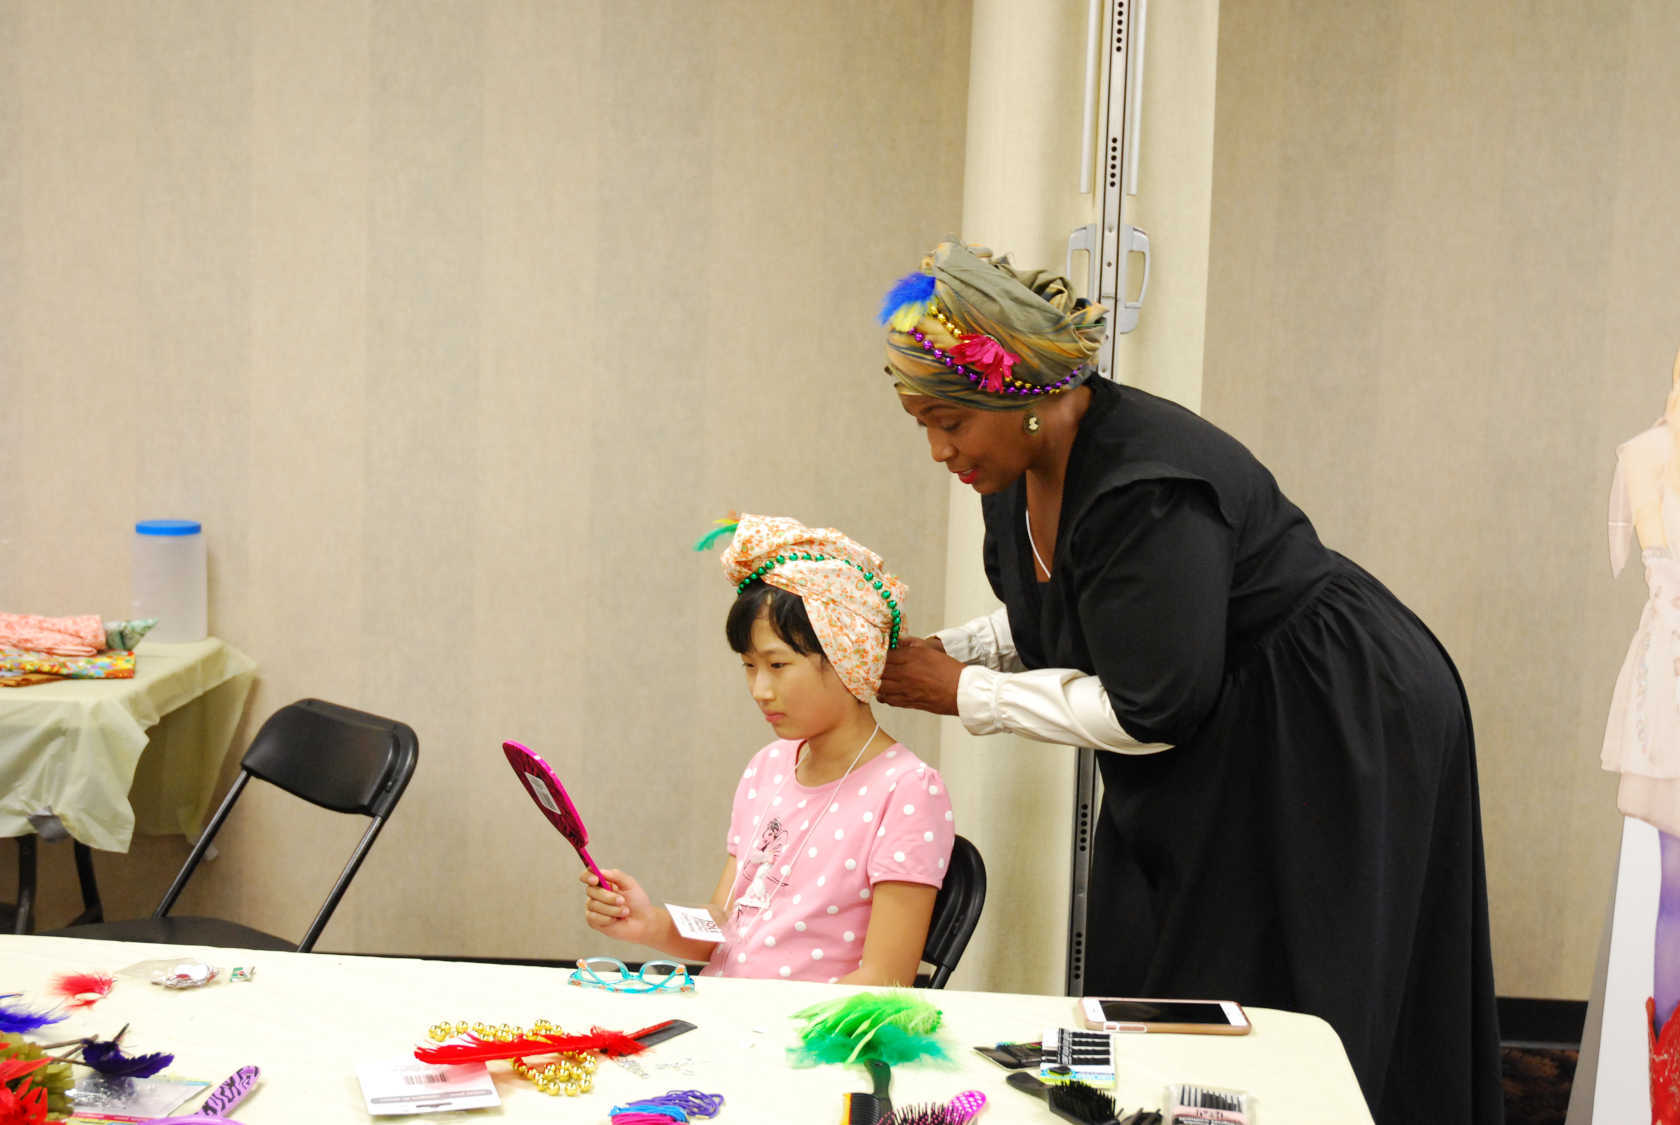 As part of the 2017 FolkFabulous program, New Orleans-based artist Karen Livers offered educational workshops on headwrapping. Image courtesy of the McKissick Museum.